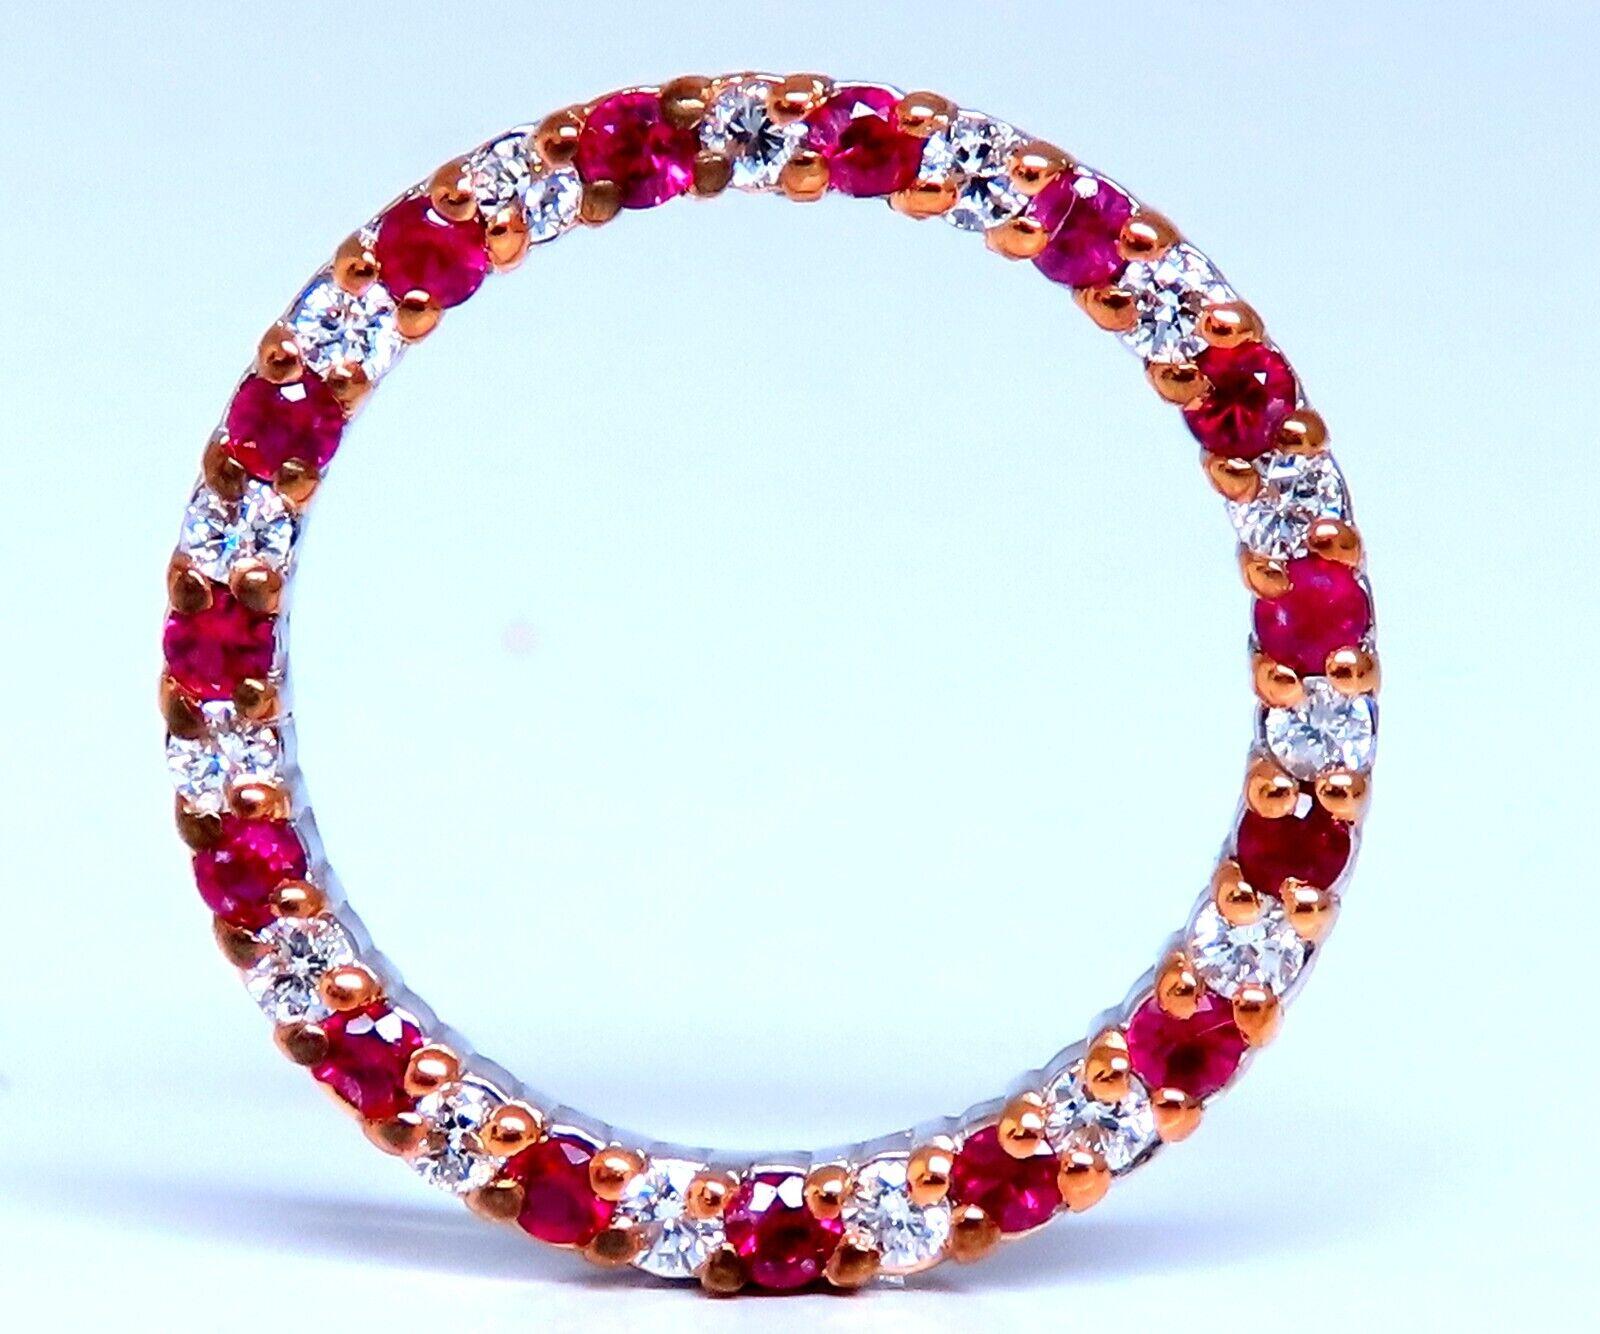 Red Ruby & Diamonds circle Necklace

Sharing / Common prong, Max. Brilliance

.33ct. natural round ruby

Full faceted rounds, 

clean clarity and transparent. 

.20ct. Natural diamonds.

G color Vs-2 clarity

14Kt White gold 

1.8 grams.

Circle